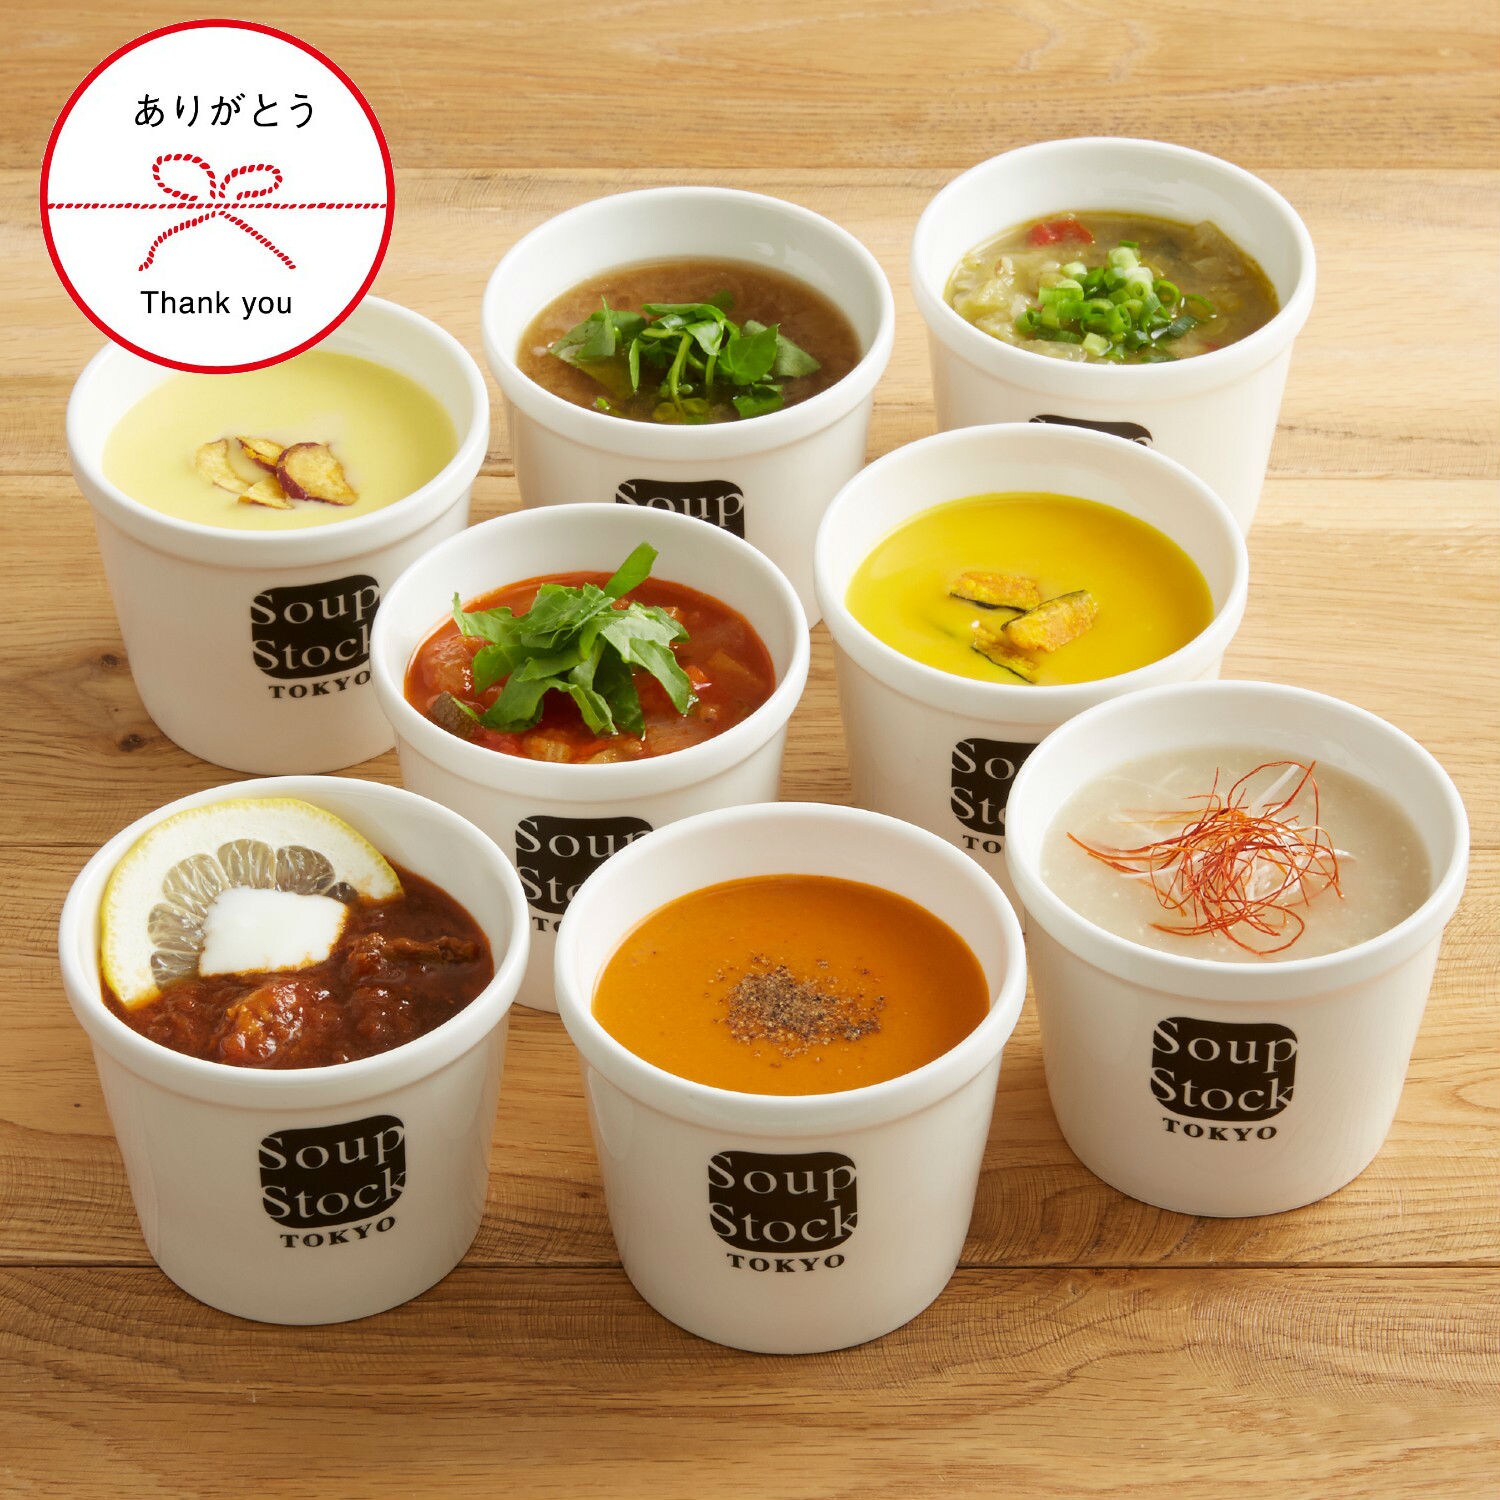 【Soup Stock Tokyo】スープストックトーキョー 人気のスープ 8種類セット